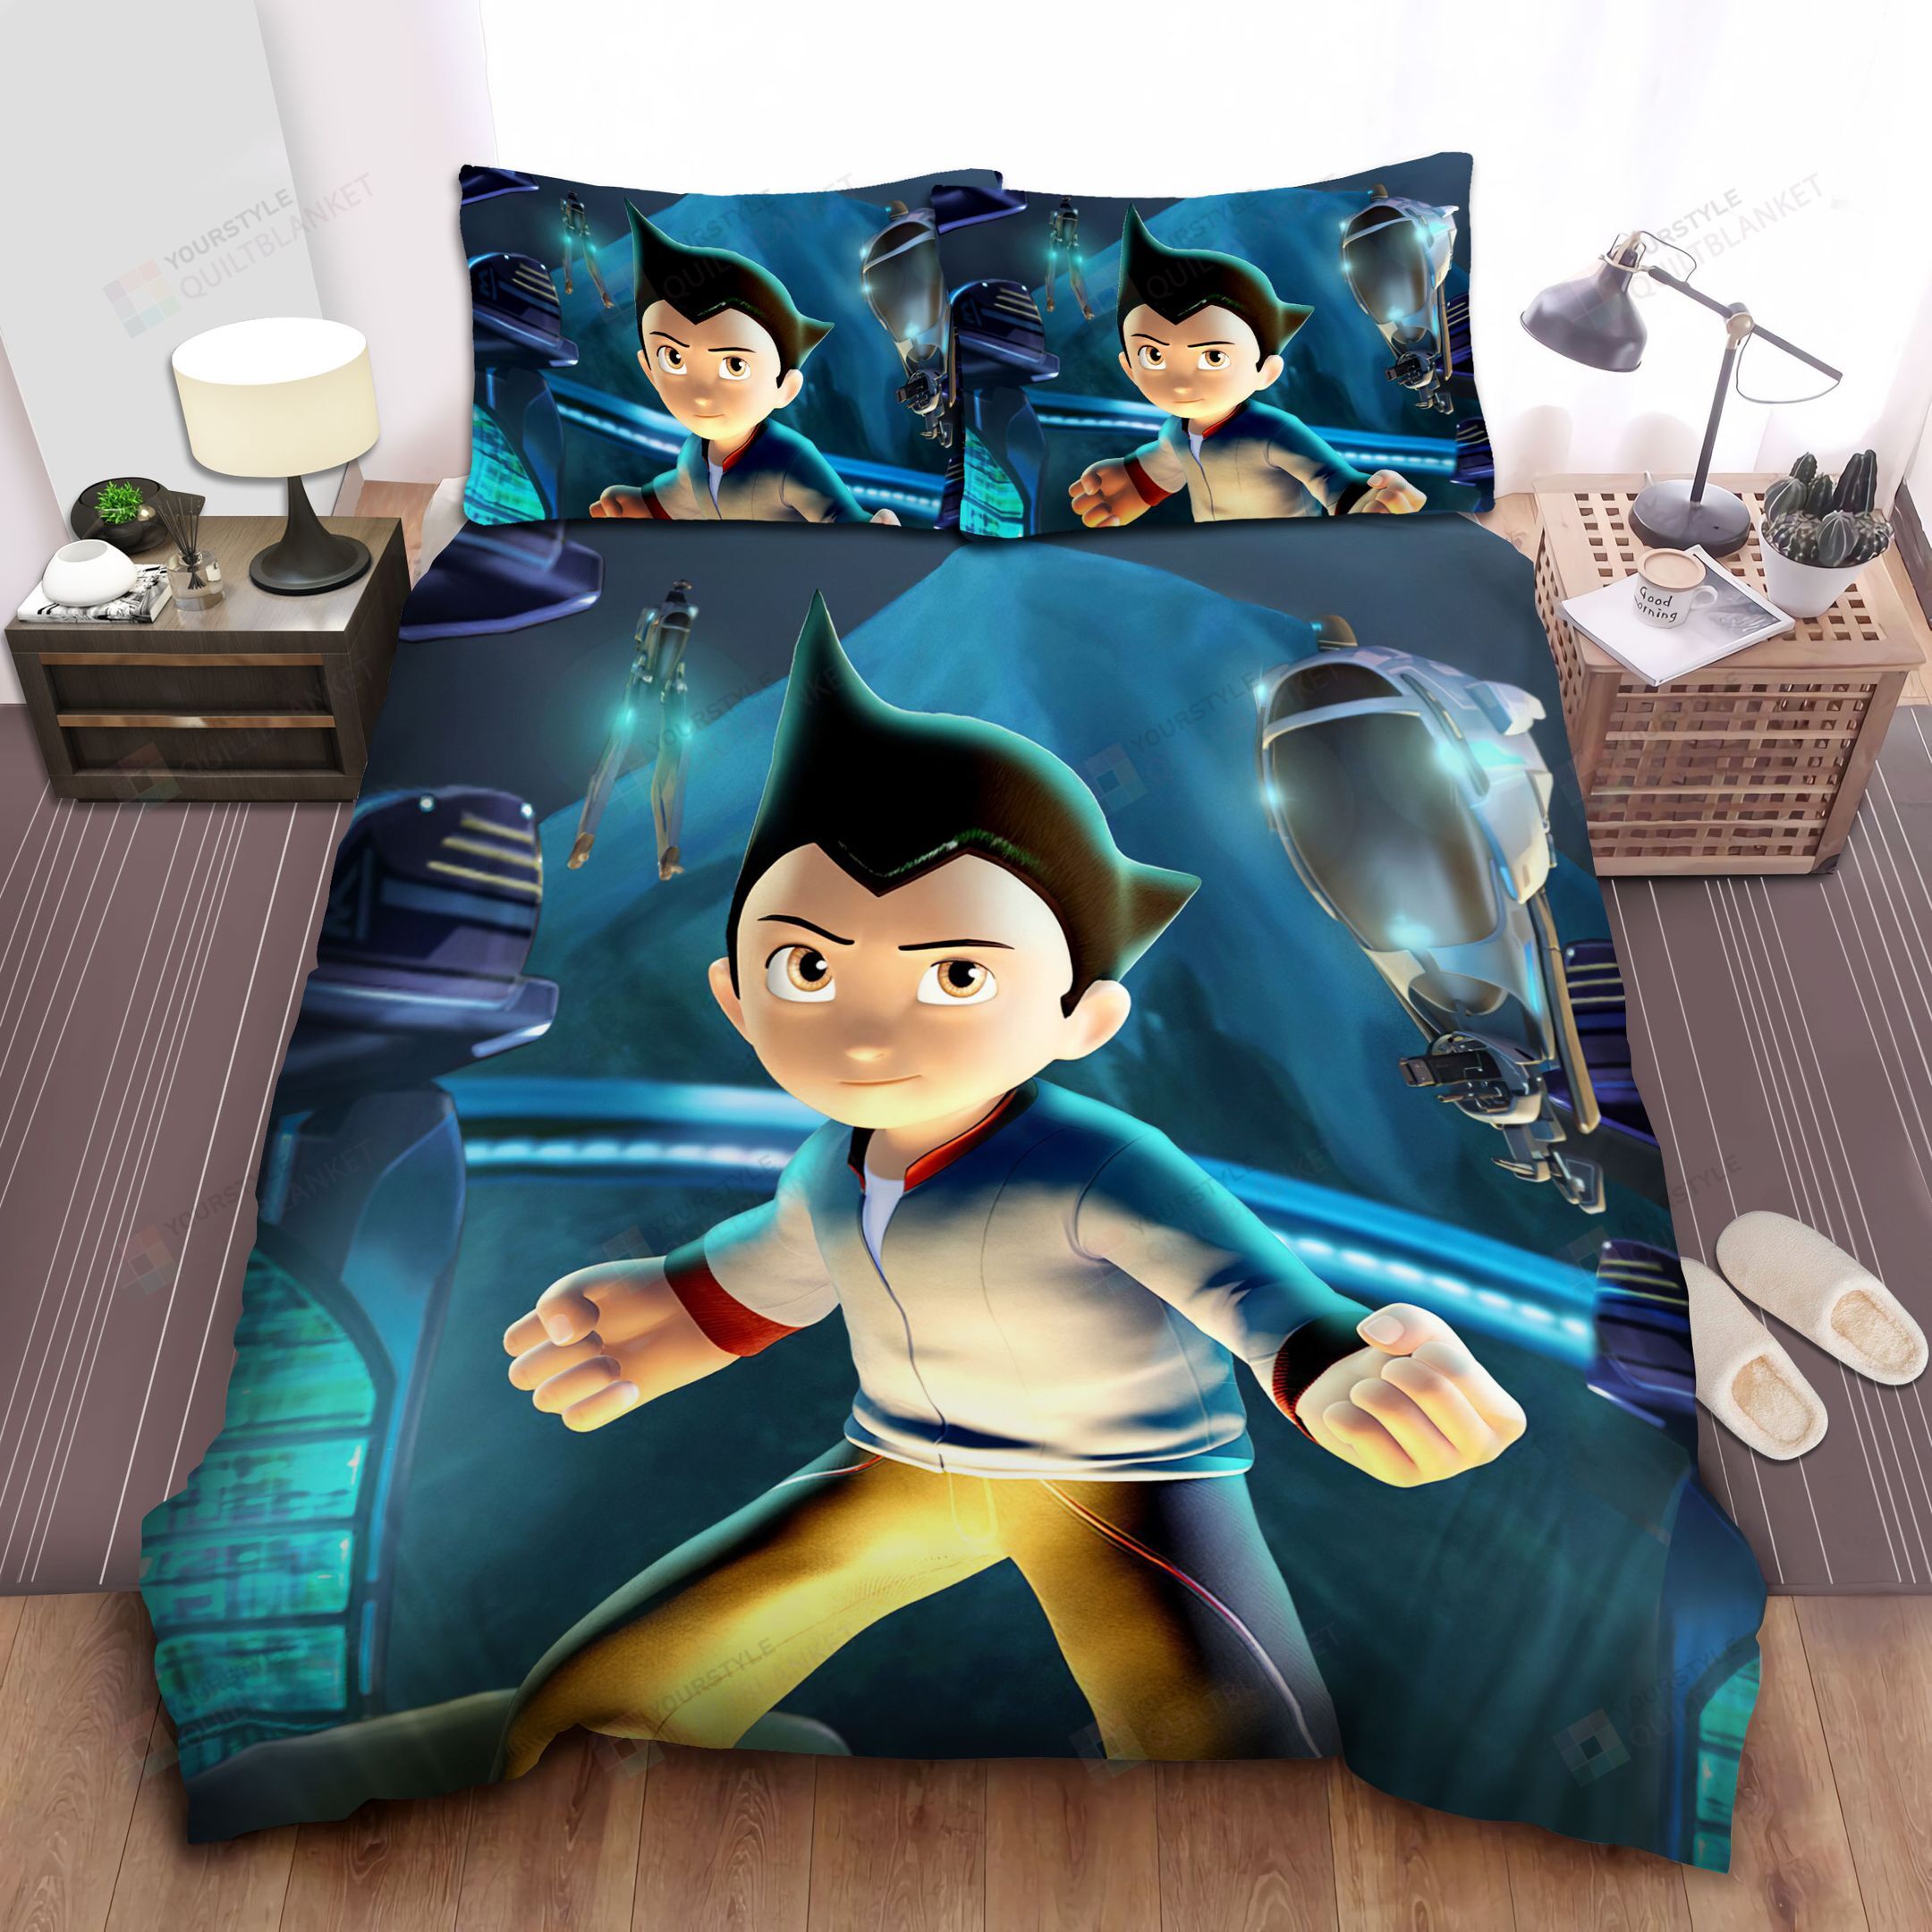 Movie Scenery Bed Sheets Spread Comforter Duvet Cover Bedding Sets